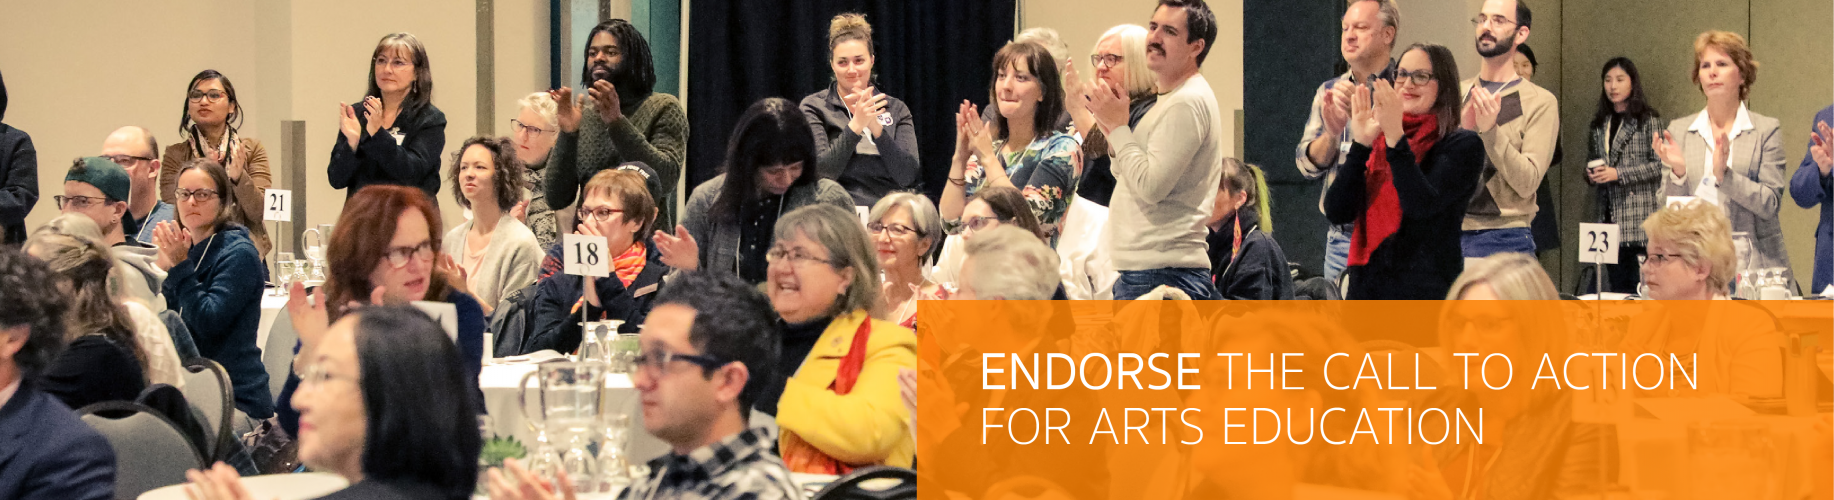 Endorse the Call to Action for Arts Education